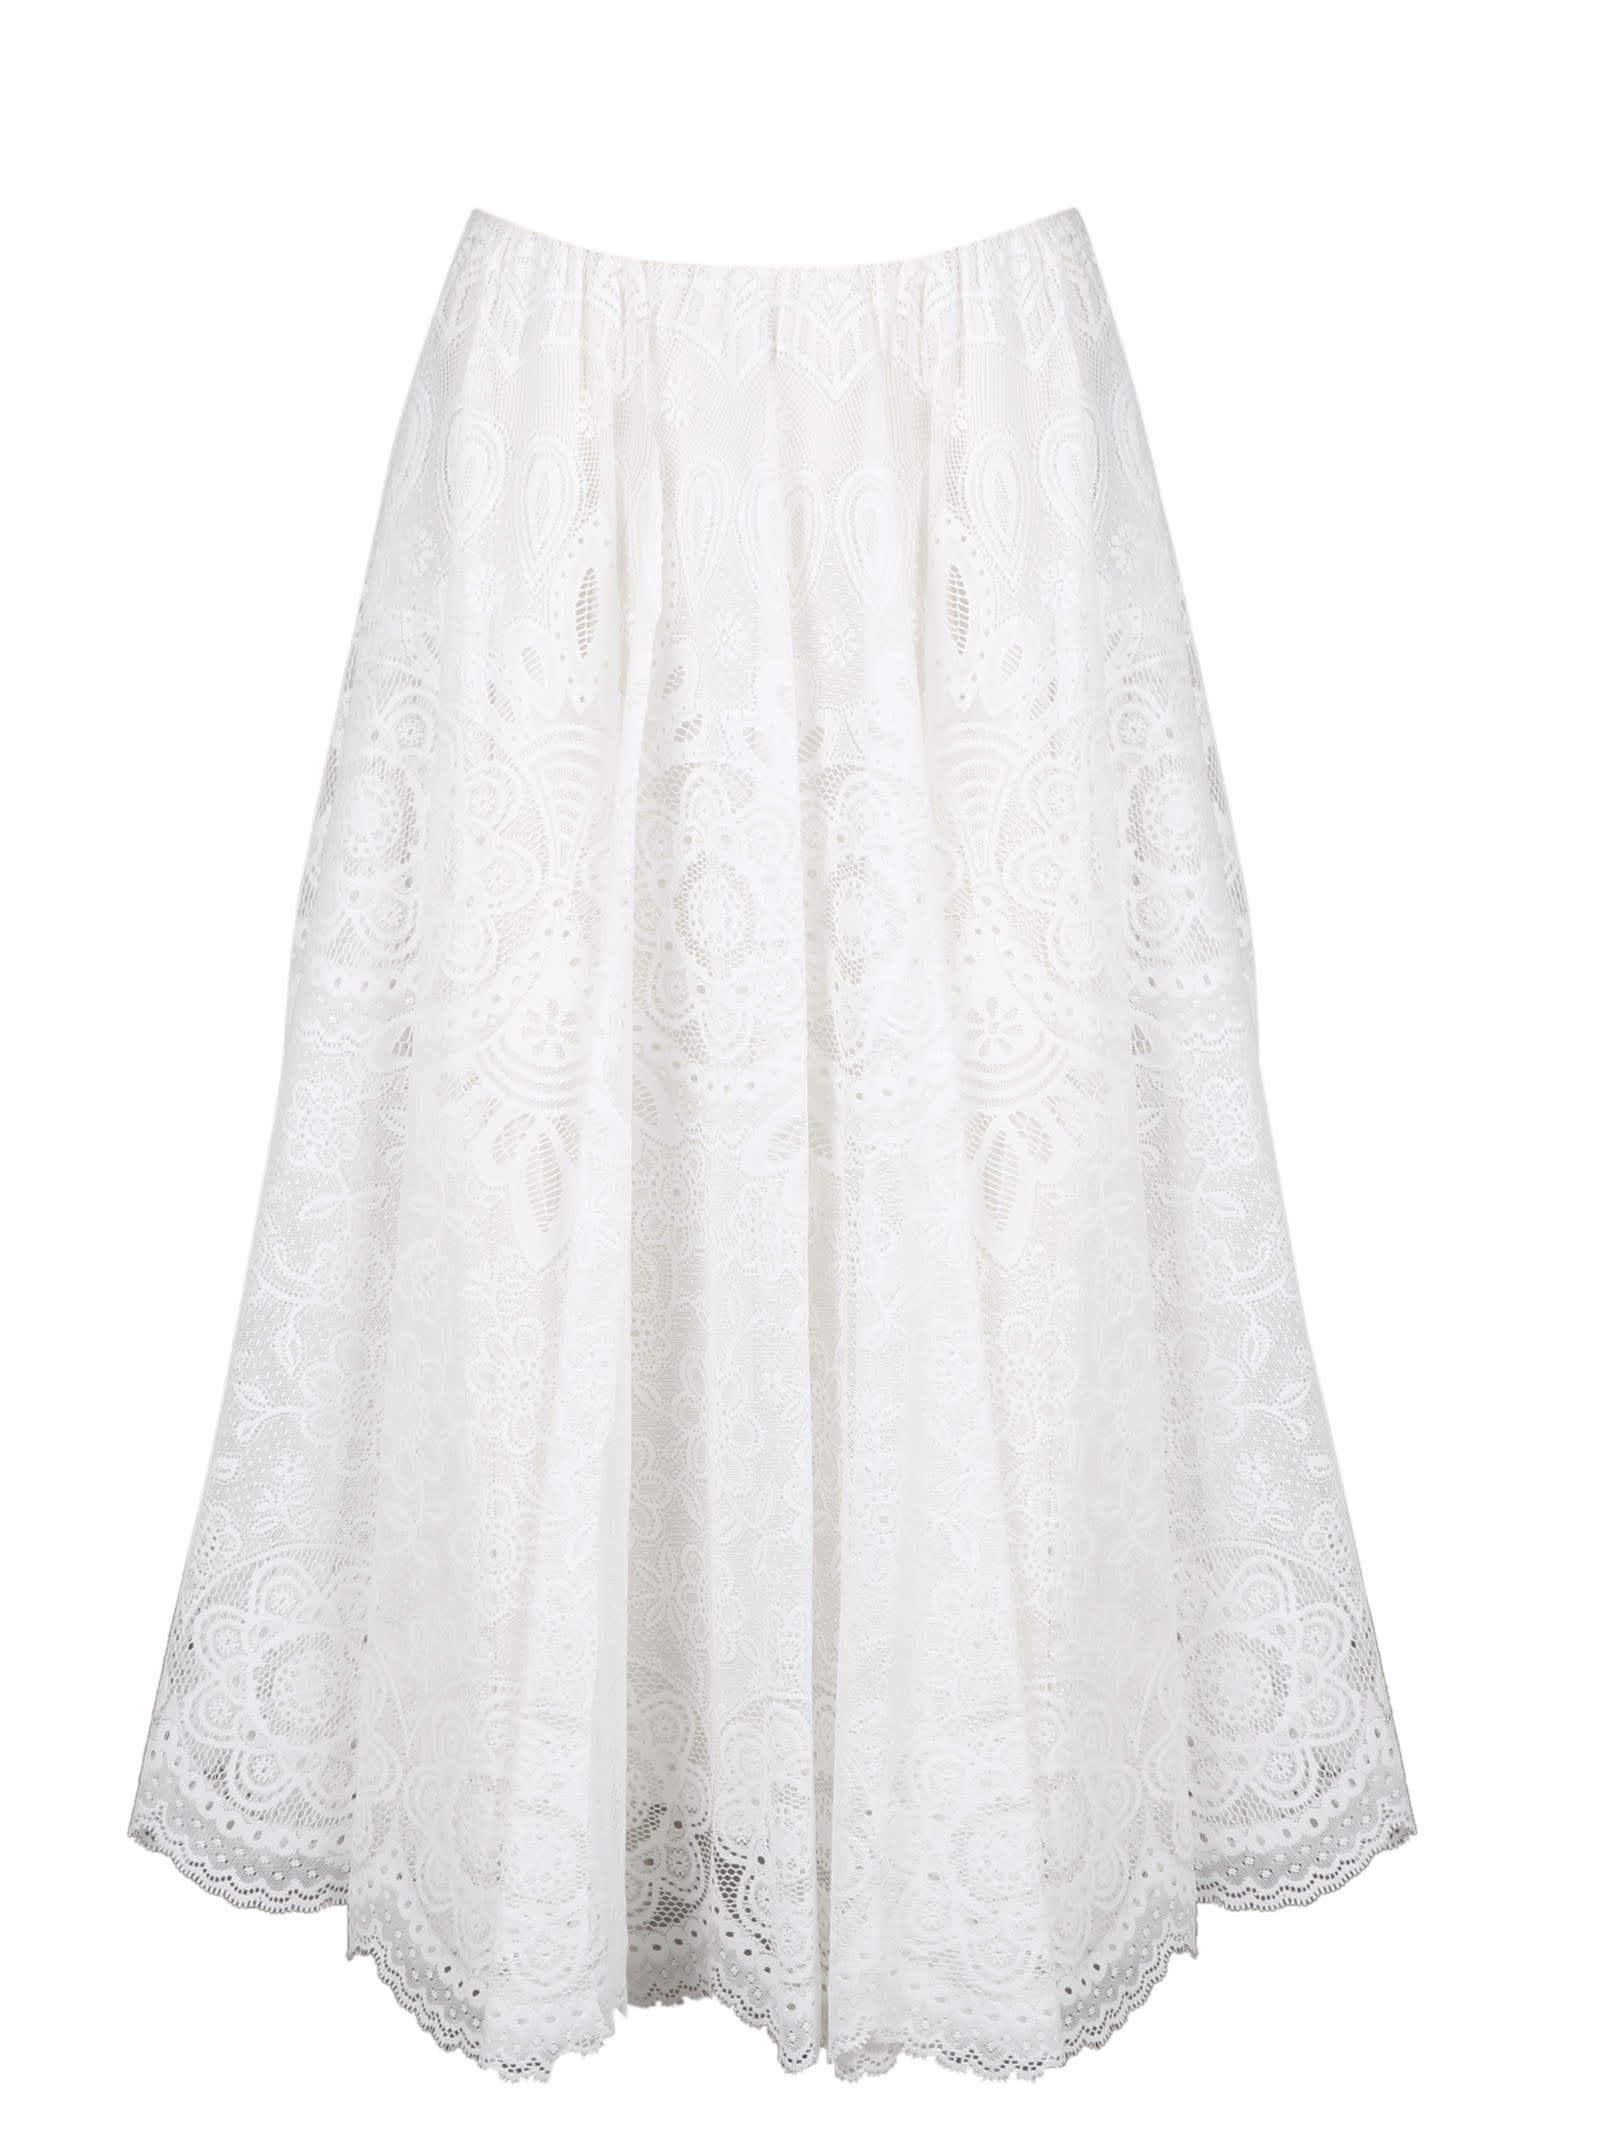 RED Valentino Lace Wheel Skirt